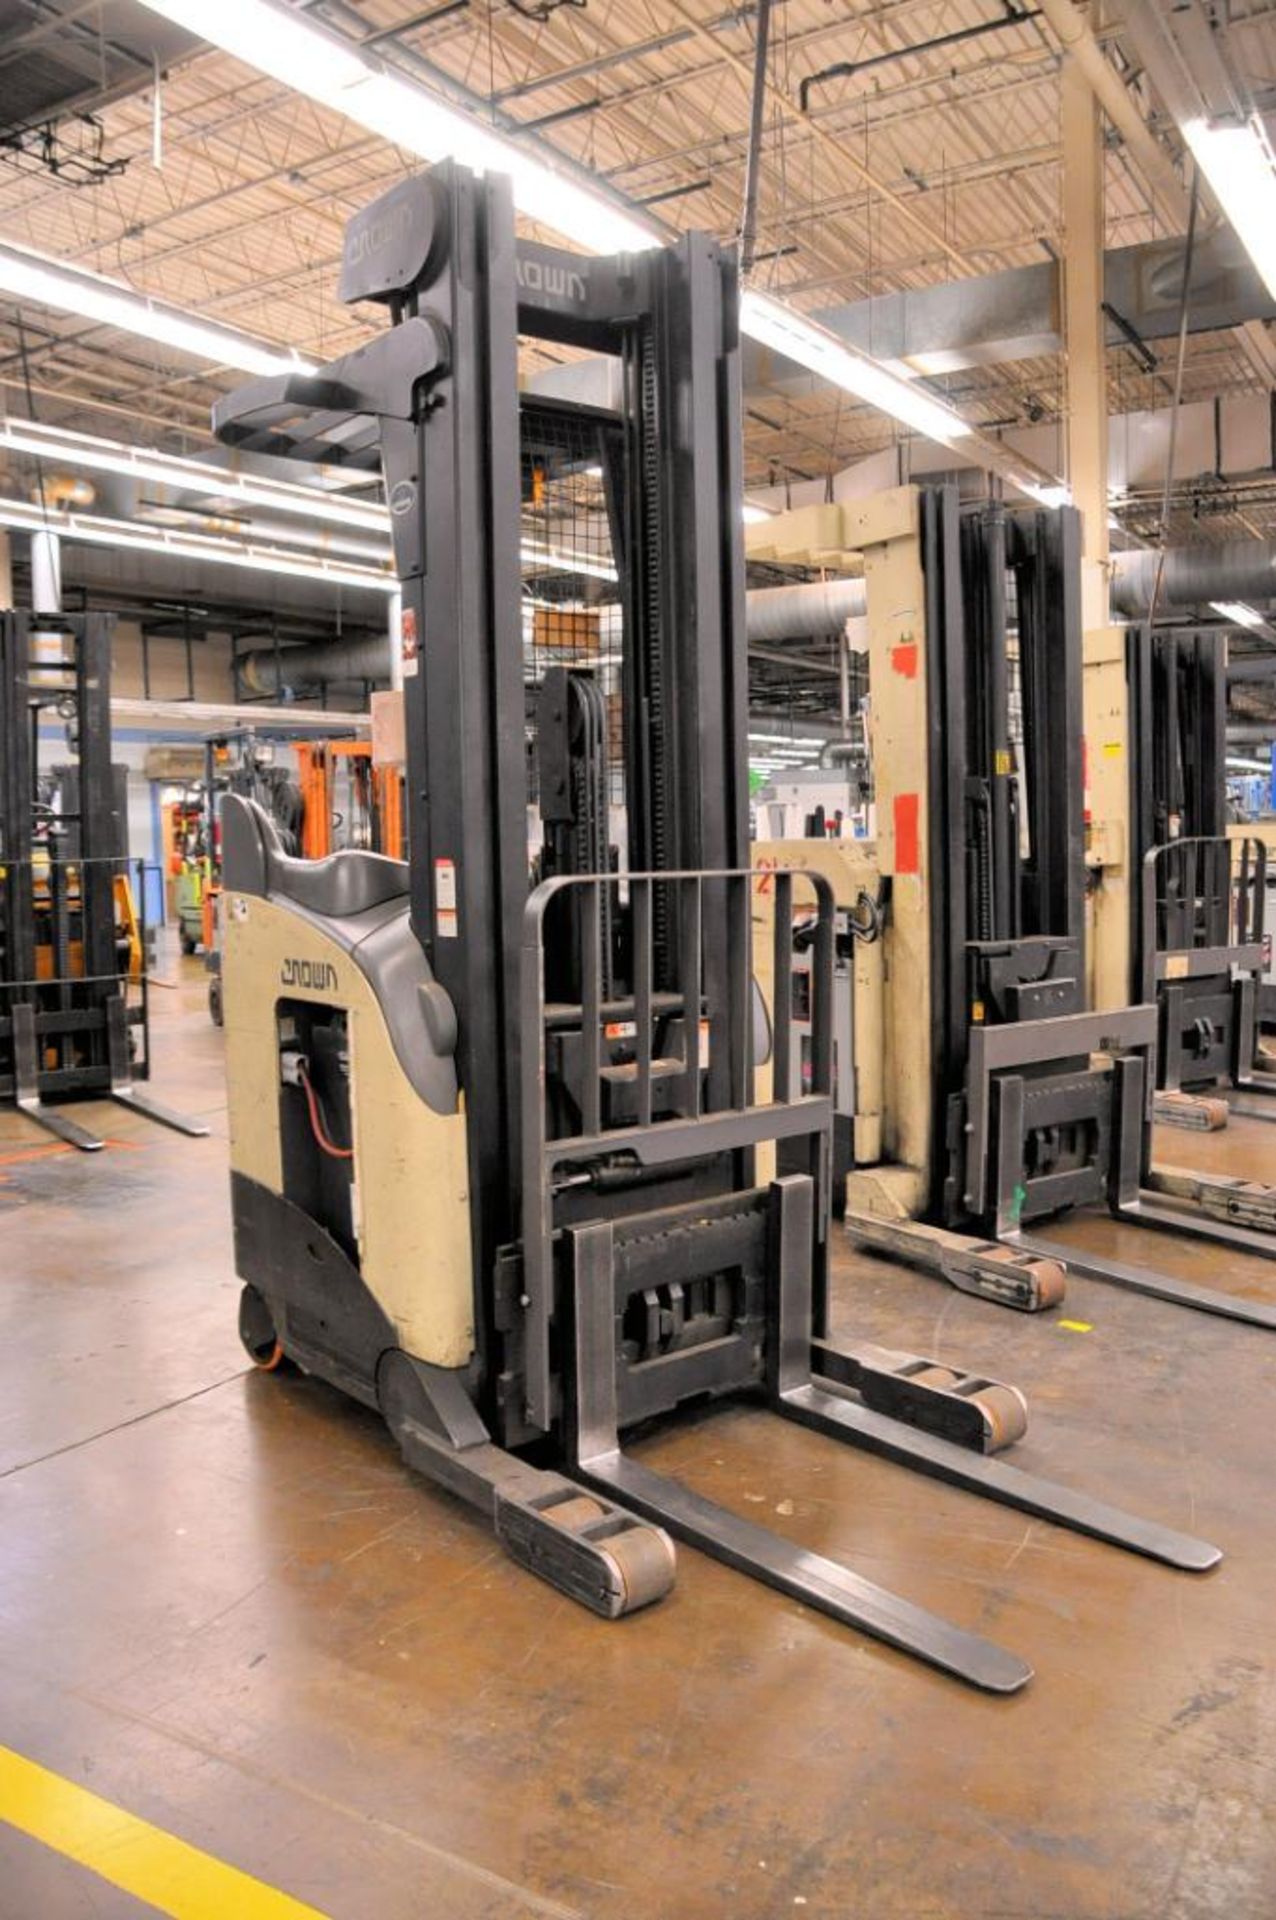 Crown 5200 Series 3,000-lb. Capacity Electric Standup Forklift Truck, S/N: 1A248393 - Image 2 of 5